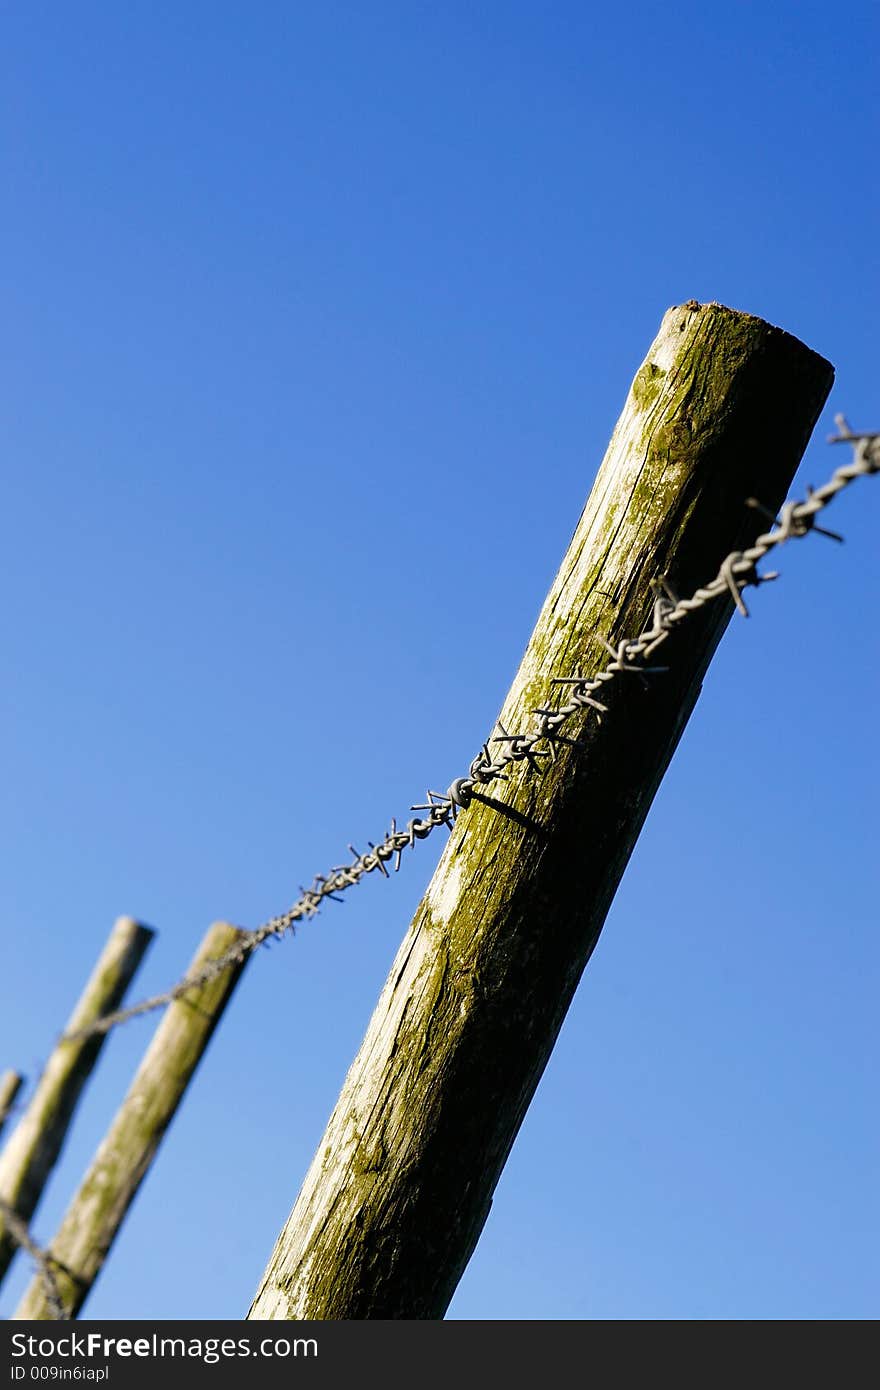 Barbed wire fence attached to wooden poles against blue sky